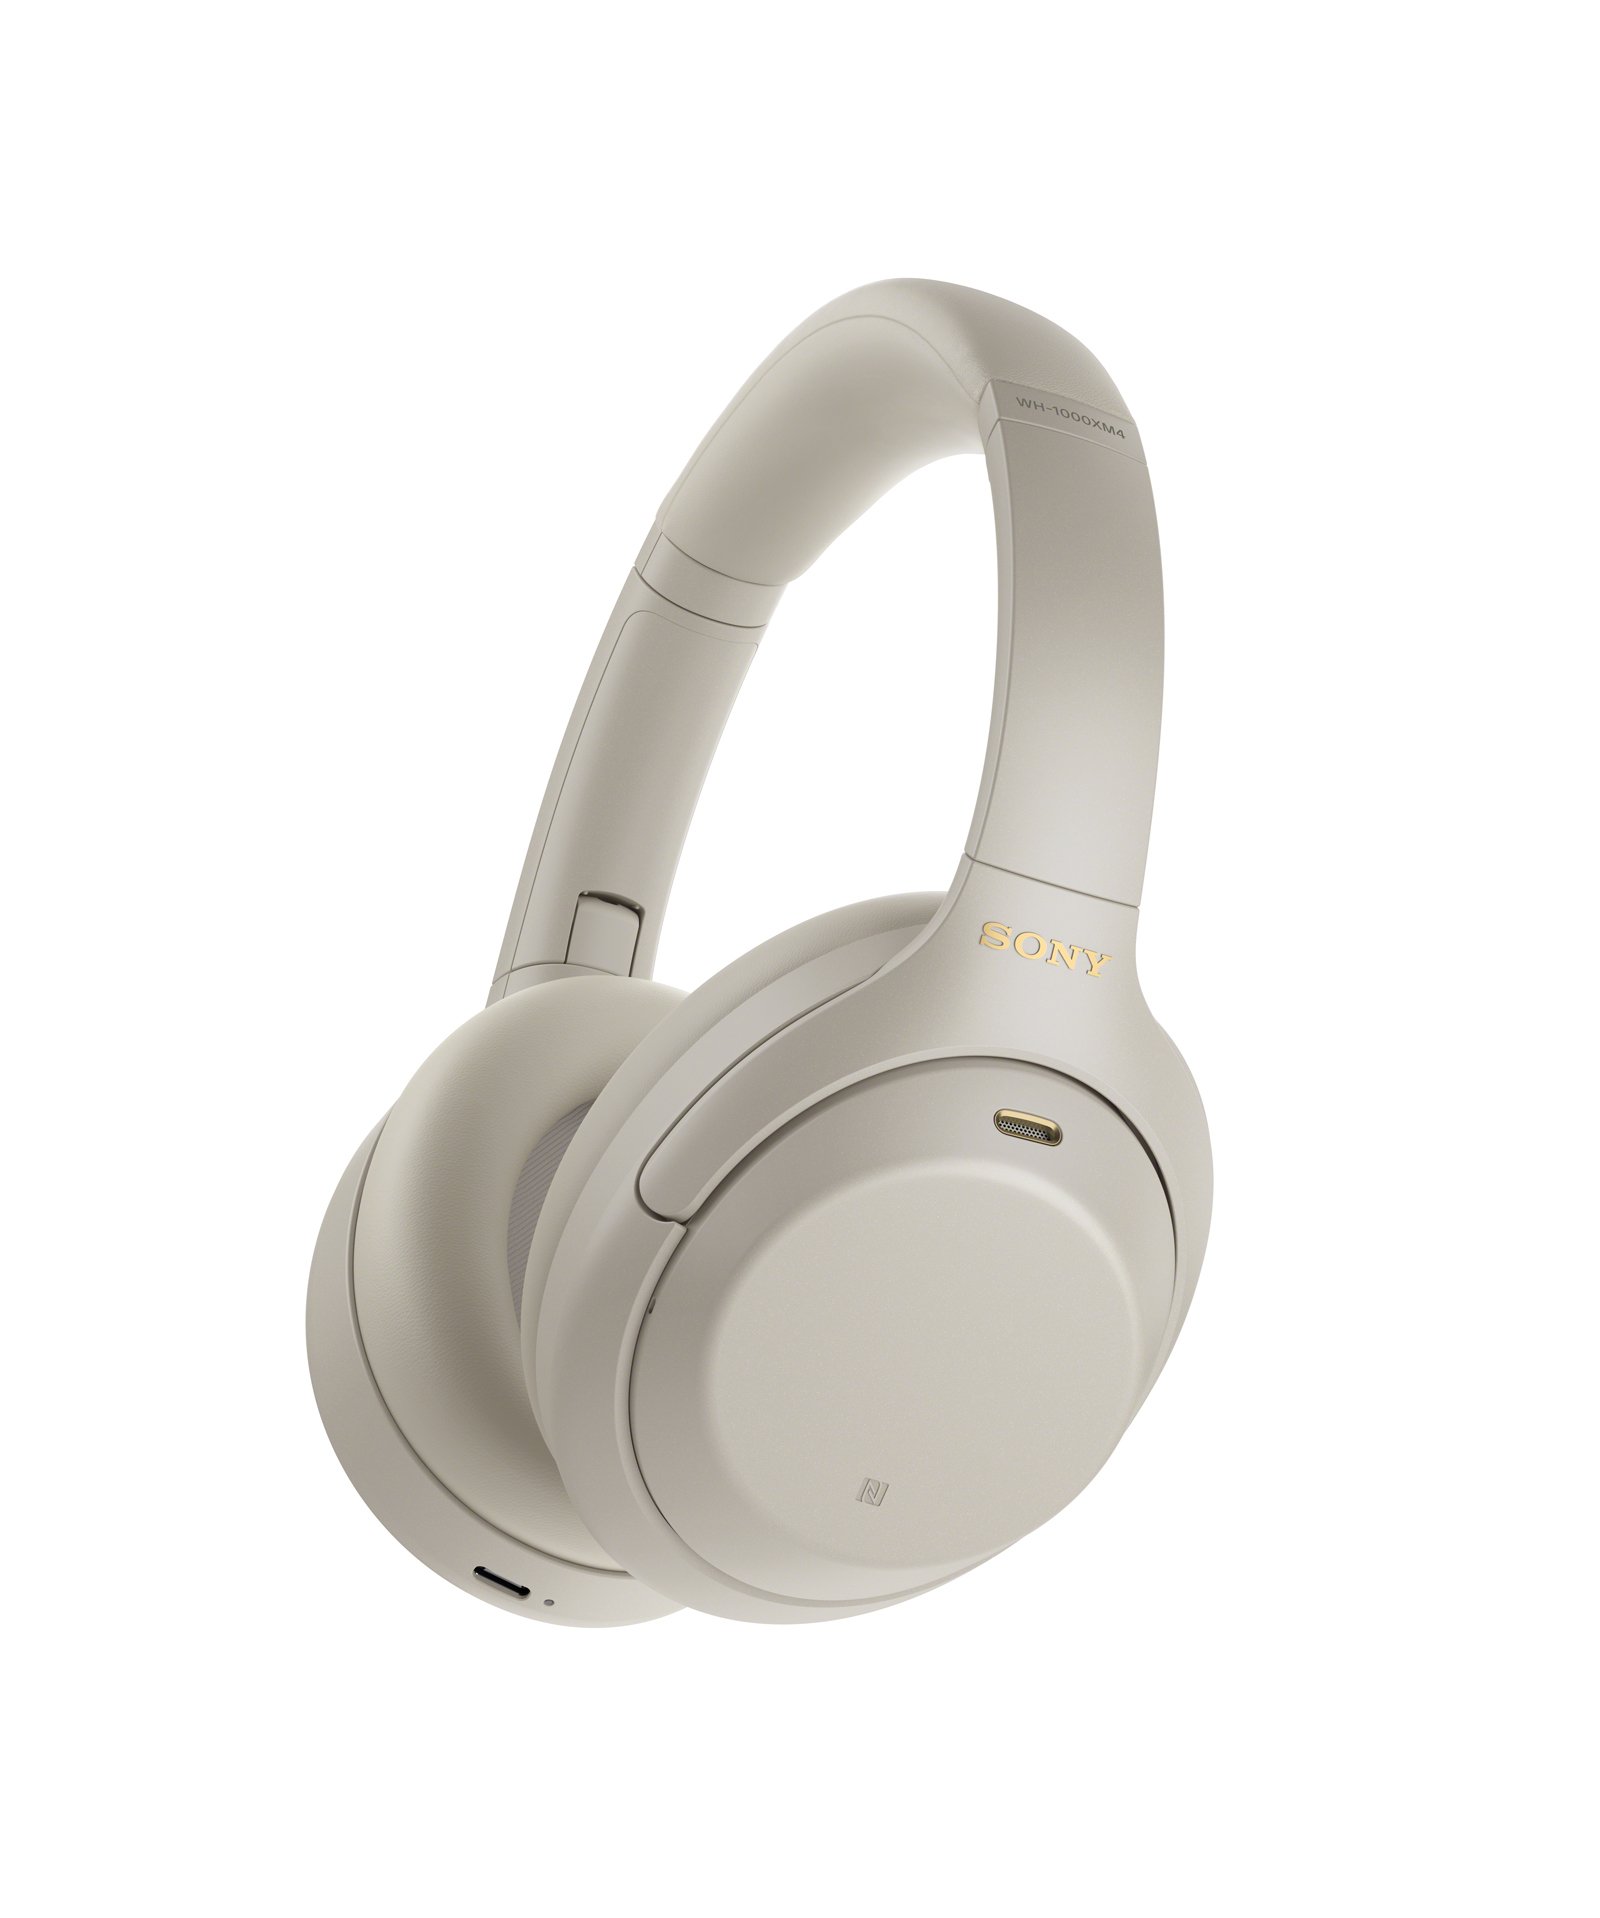 Sony Auriculares 1000X4S / WH1000XM4S.CE7 Plata